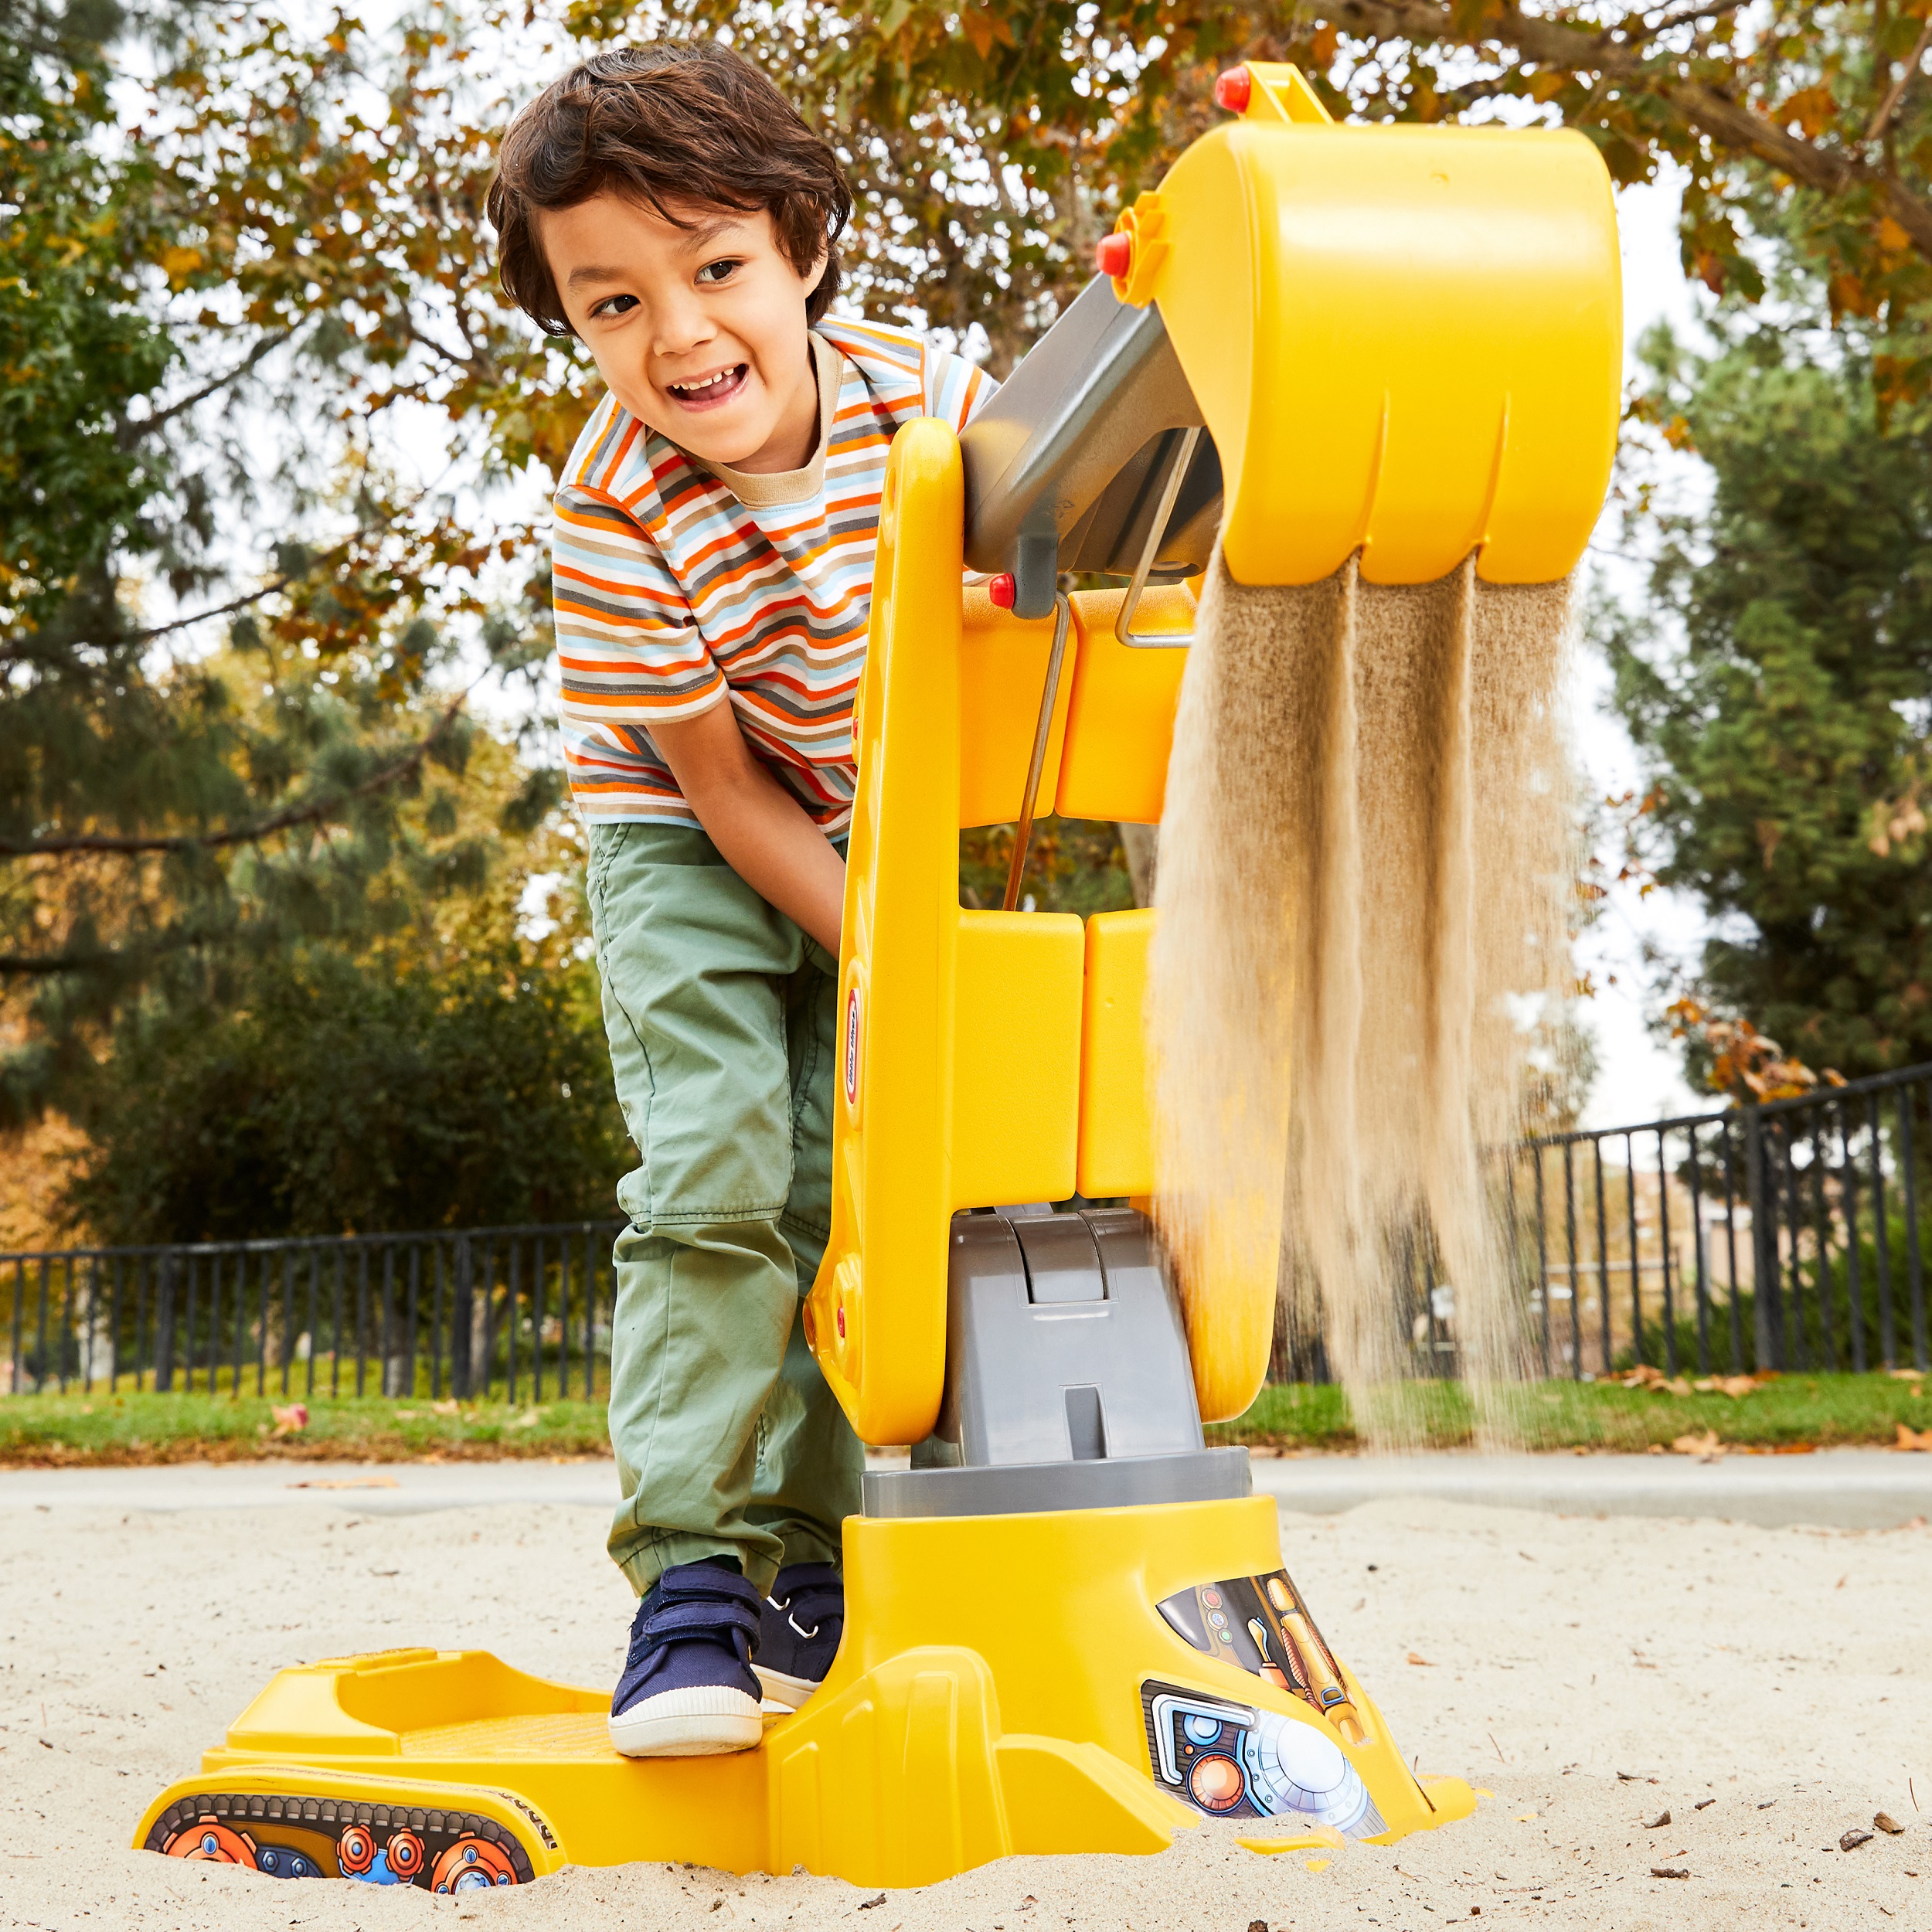 Little Tikes You Drive Sand Toy Excavator with Swivel For Sit and Stand Scoop and Dump Play Set with Kid-Sized Crane, Yellow- Toys For Kids Toddlers Boys Girls Ages 3 4 5+ - image 5 of 7